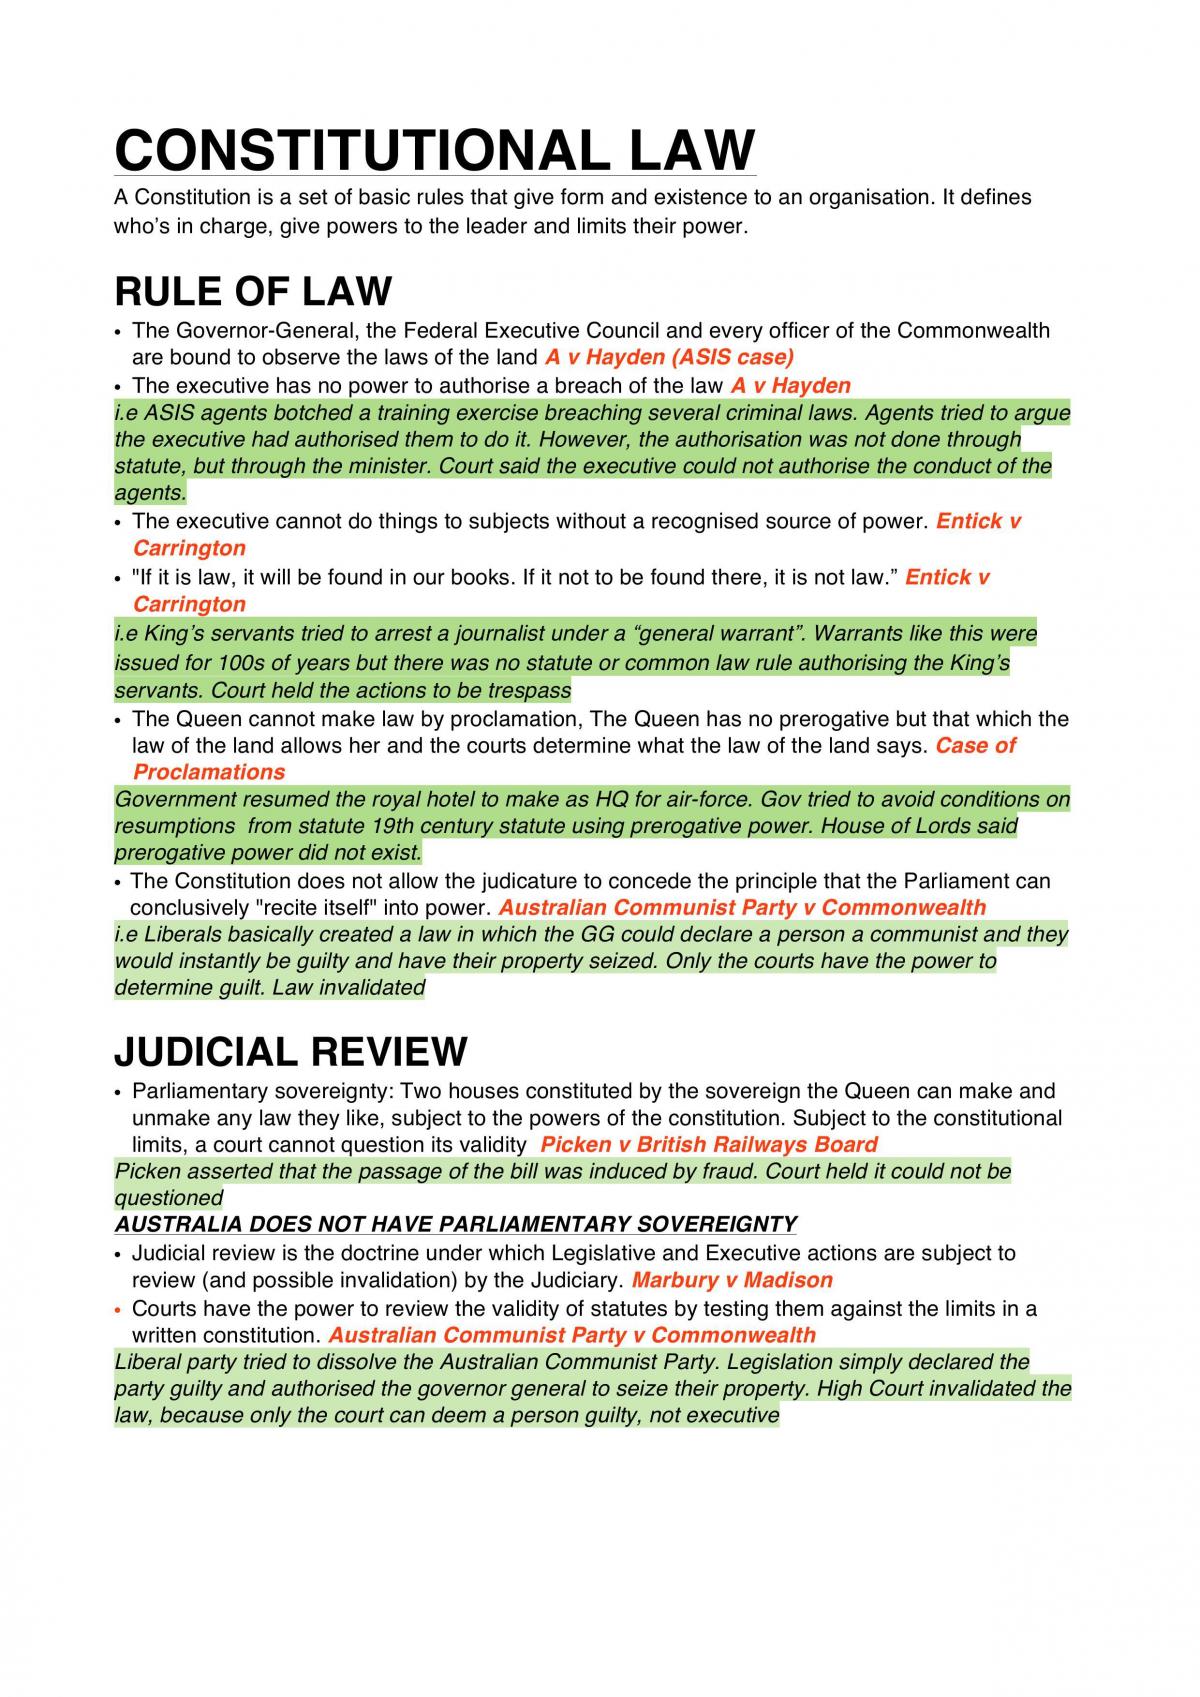 Constitutional Summary - Page 1